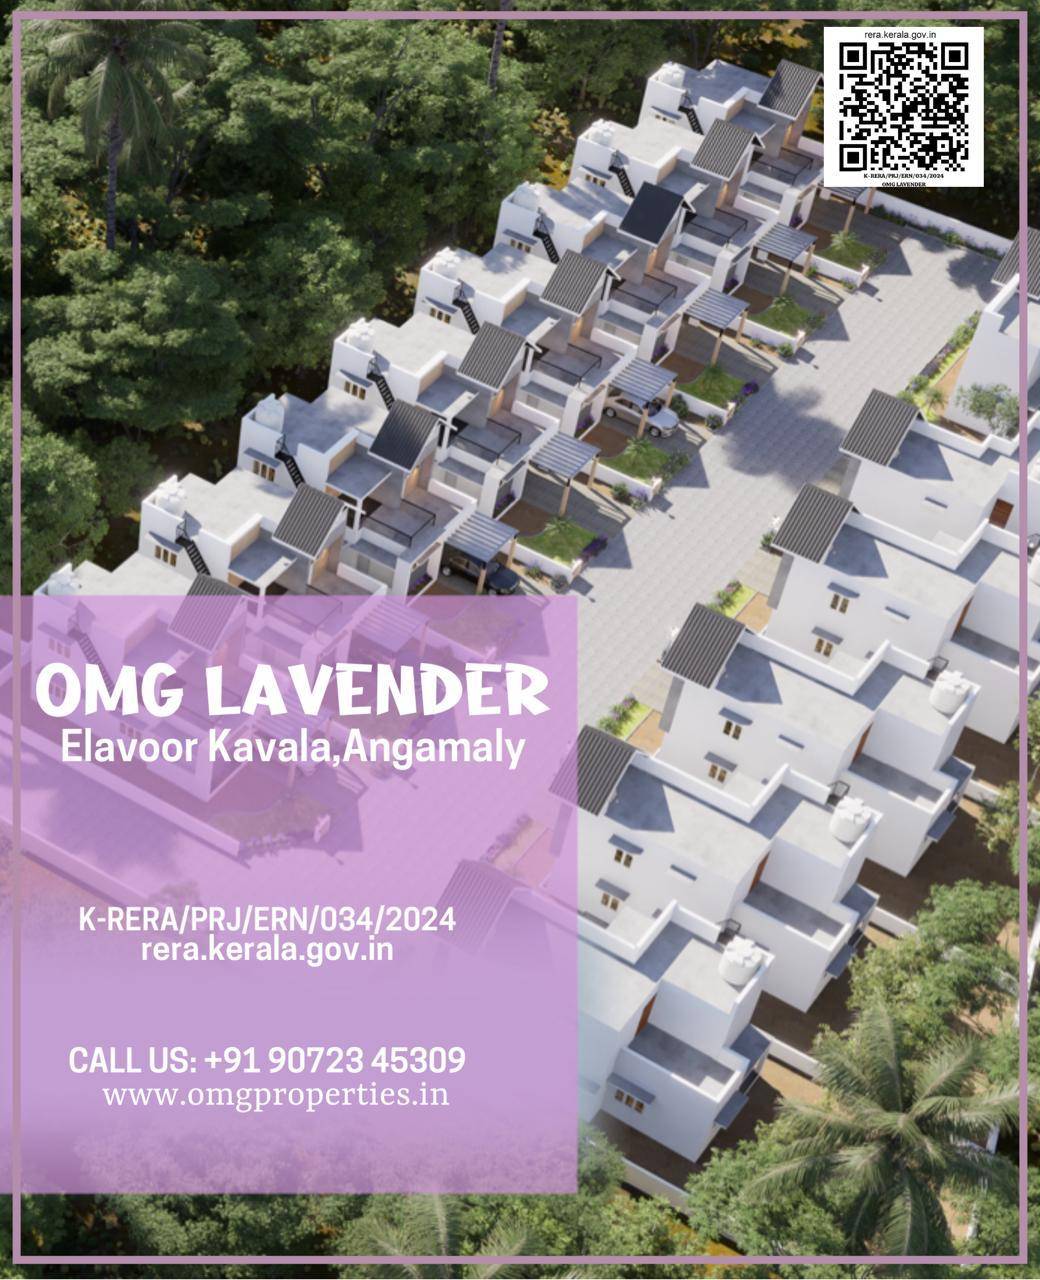 3 Bed/ 3 Bath Sell House/ Bungalow/ Villa; 1,050 sq. ft. carpet area; 658 sq. ft. lot for sale @elavoor kavala angamaly 